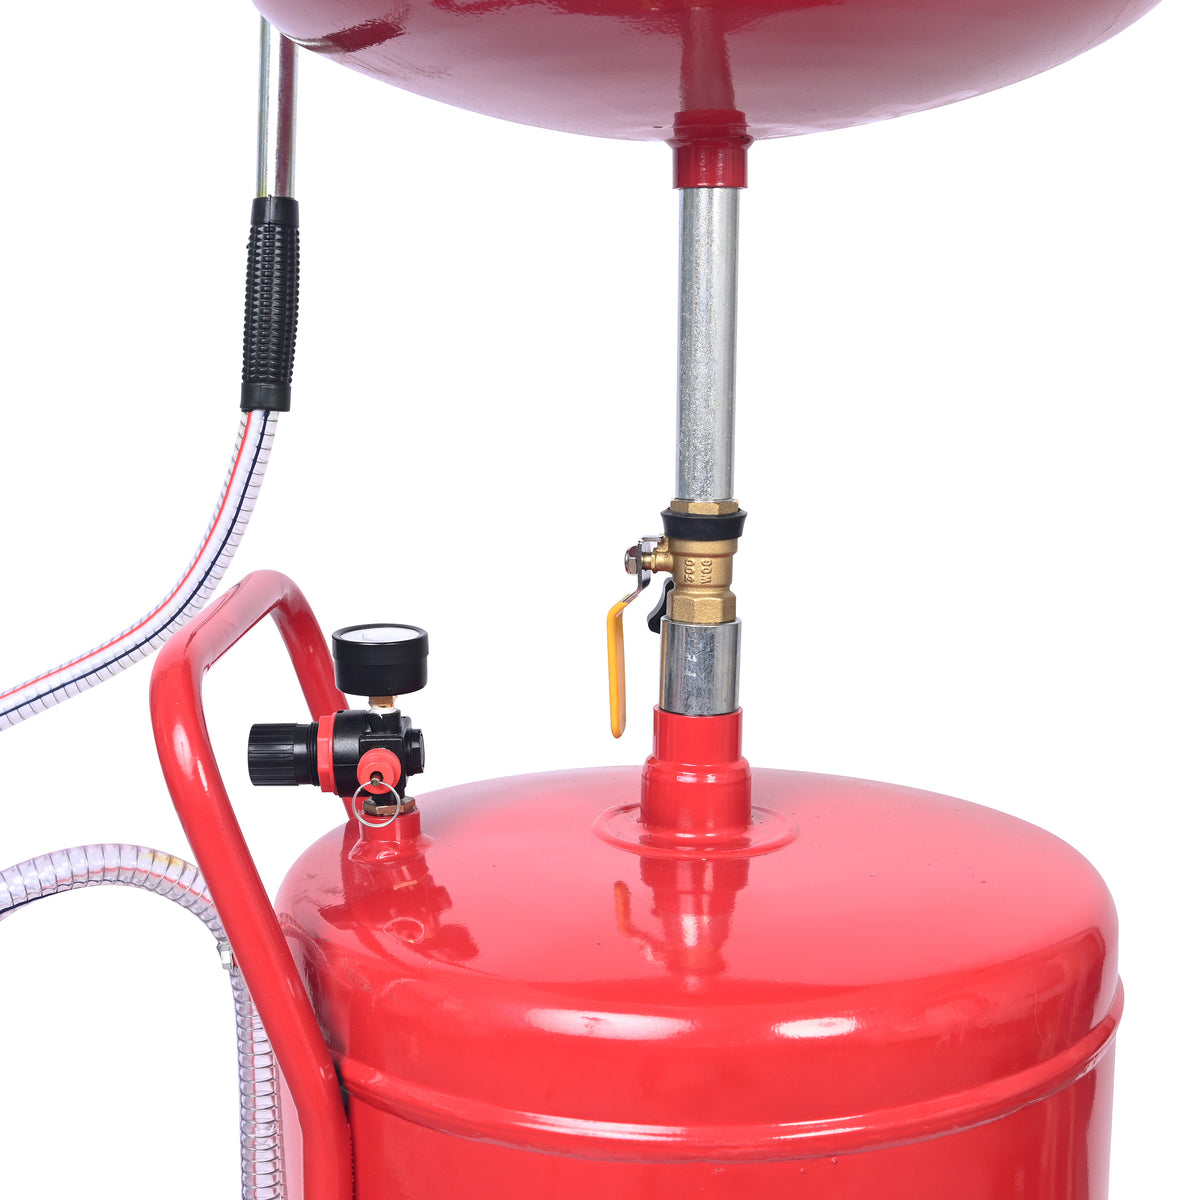 Aain 20 Gallon Portable Oil Lift Drain with Oil Pan Funnel for